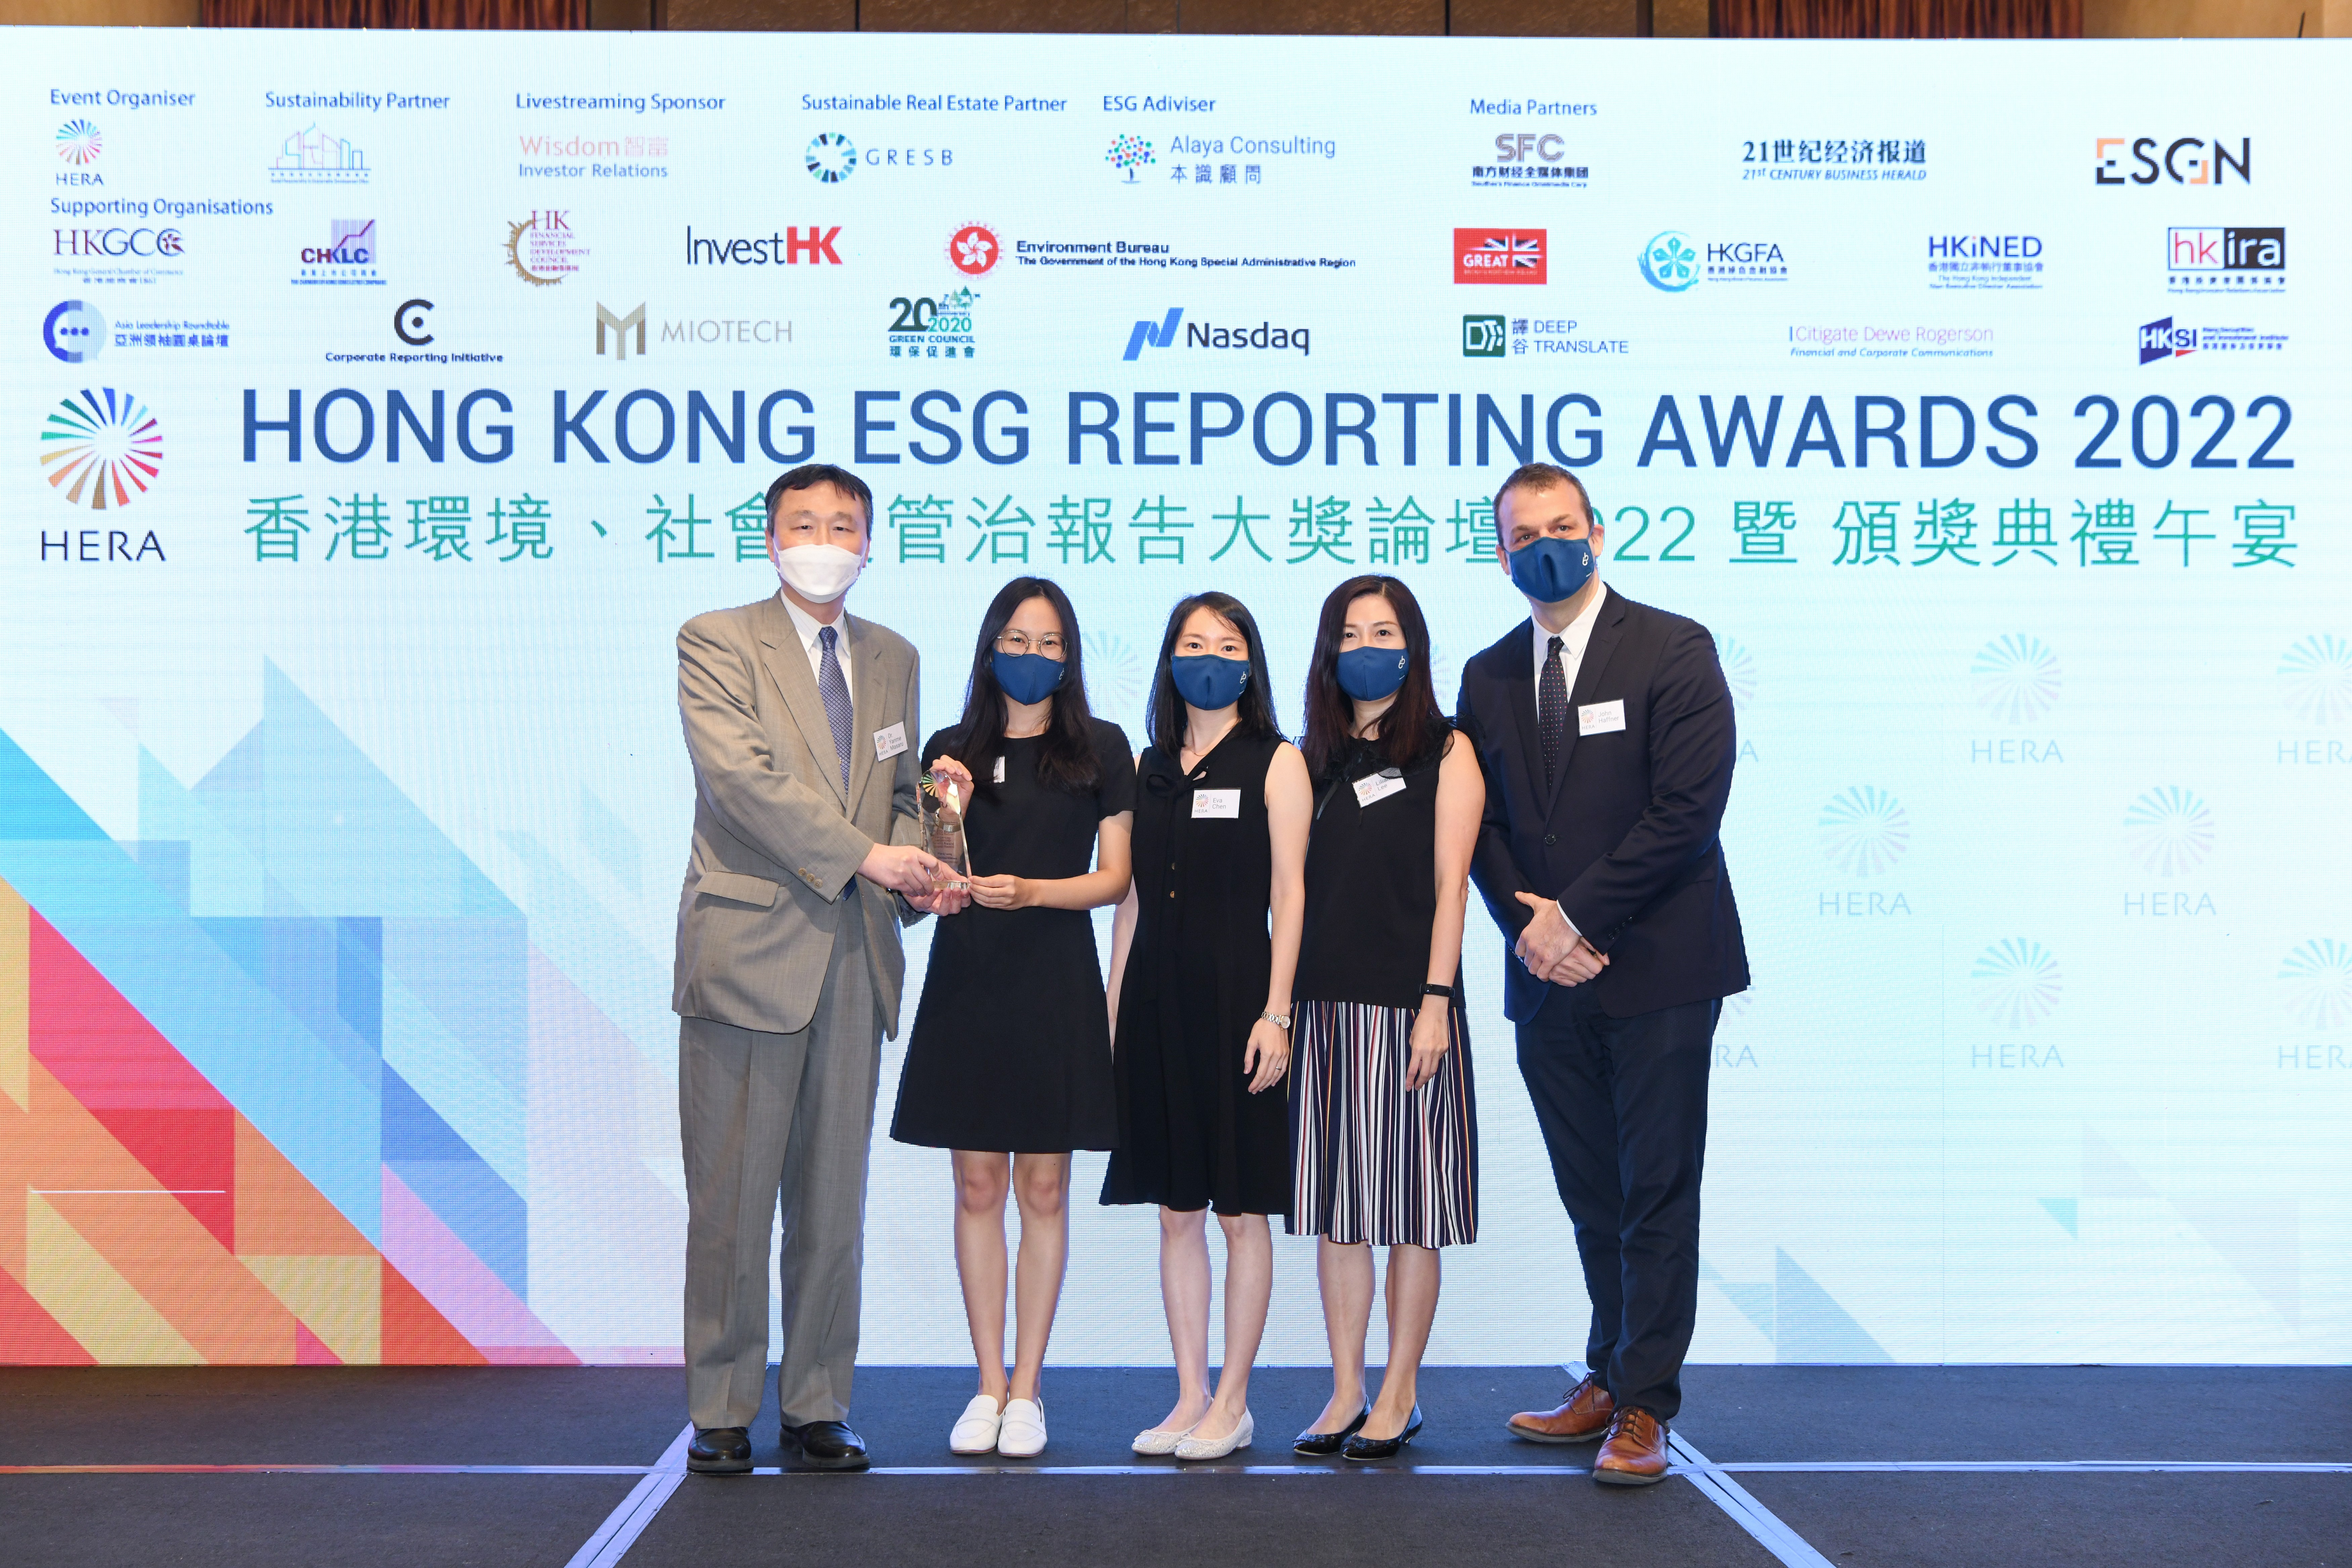 Hang Lung receives the Grand Award for Best ESG Report (Large-Cap), Grand Award in the Newcomer Award, and the Carbon Neutral Award – Commendation, at the Hong Kong ESG Reporting Awards (HERA) 2022